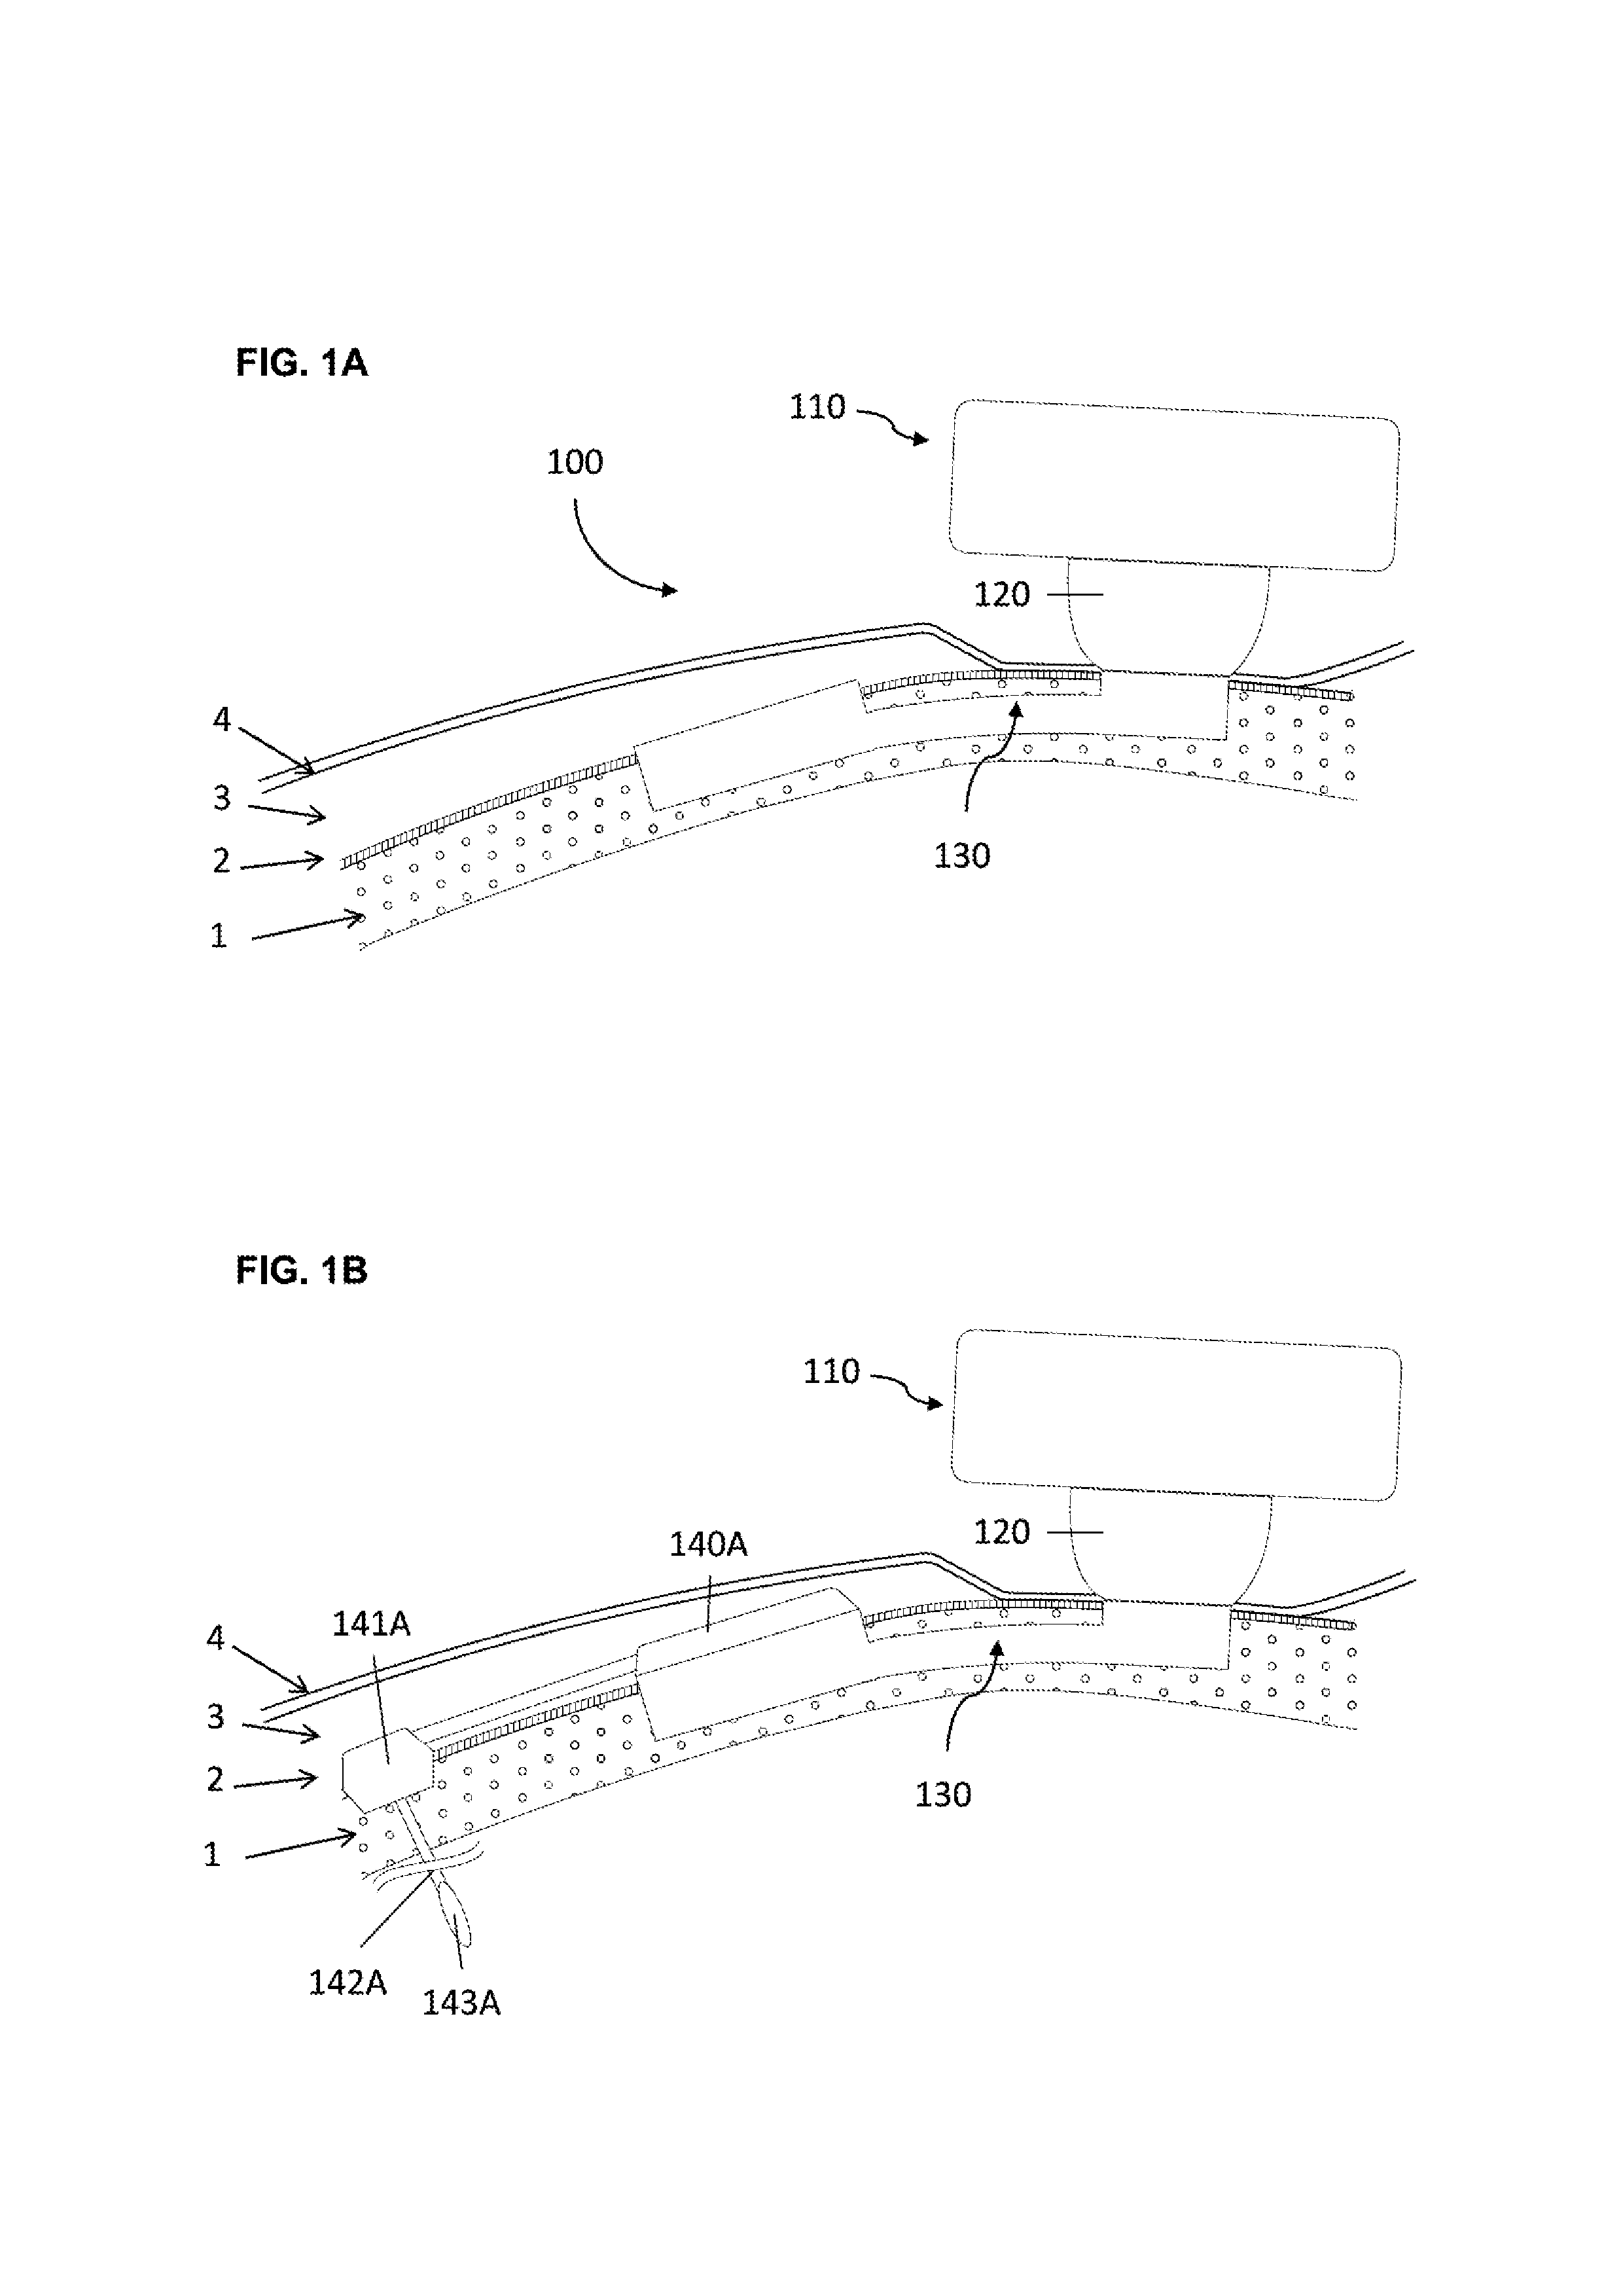 Percutaneous connection assembly for active medical devices